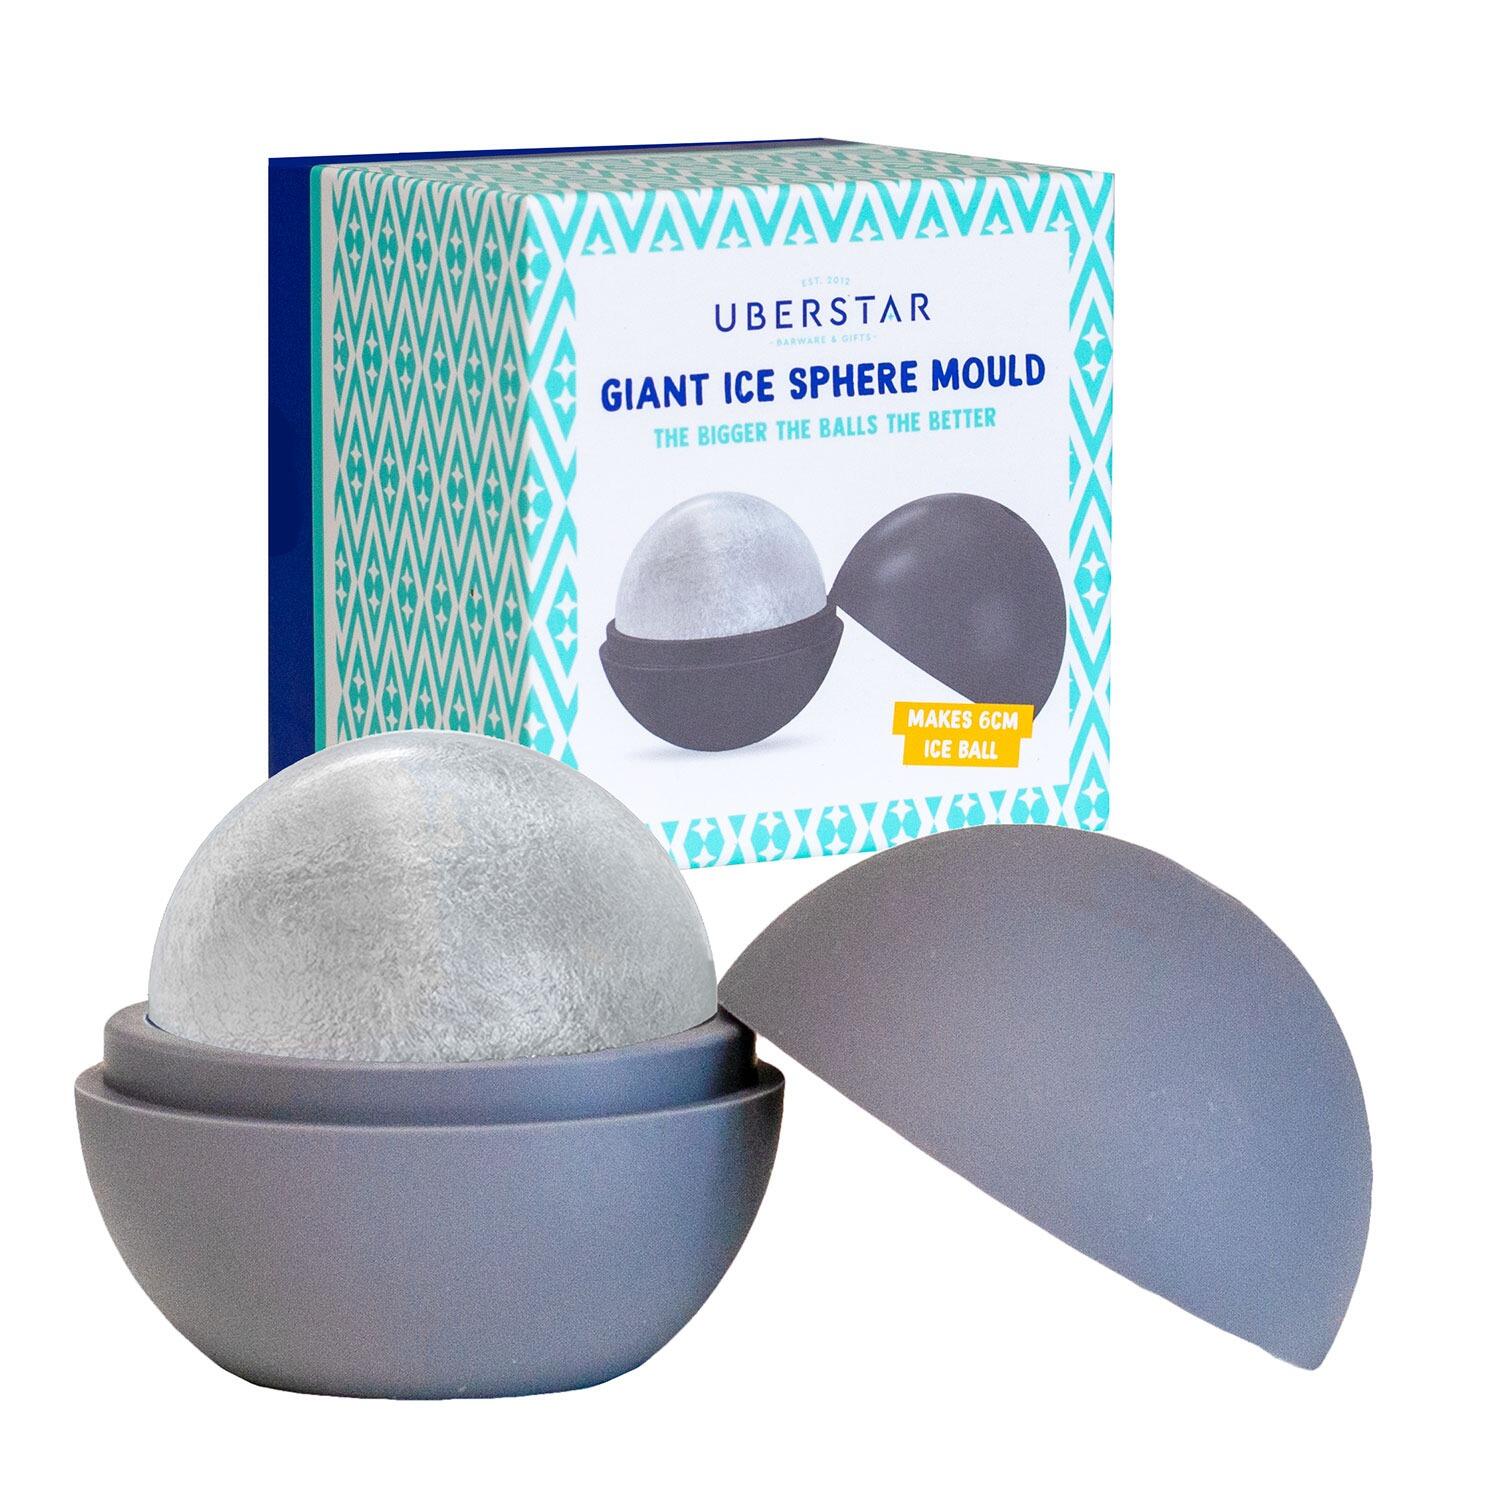 UBERSTAR Giant Ice Sphere Mould - Only £7.99